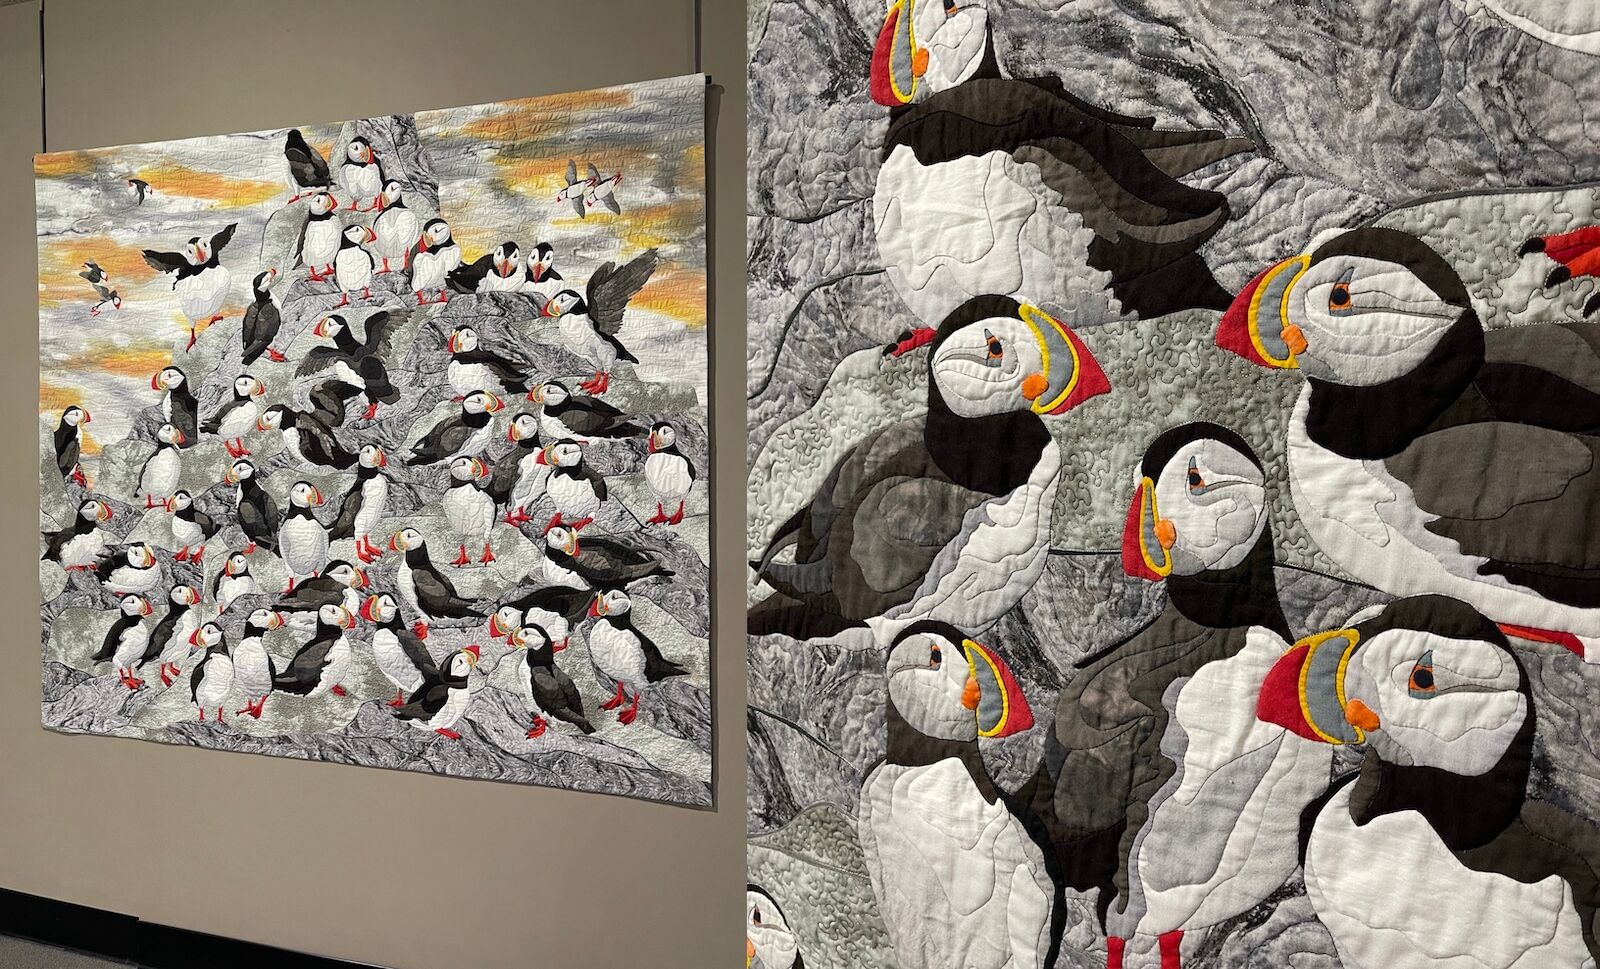 Quilt featuring puffins at the National Quilt Museum in Paducah, KY